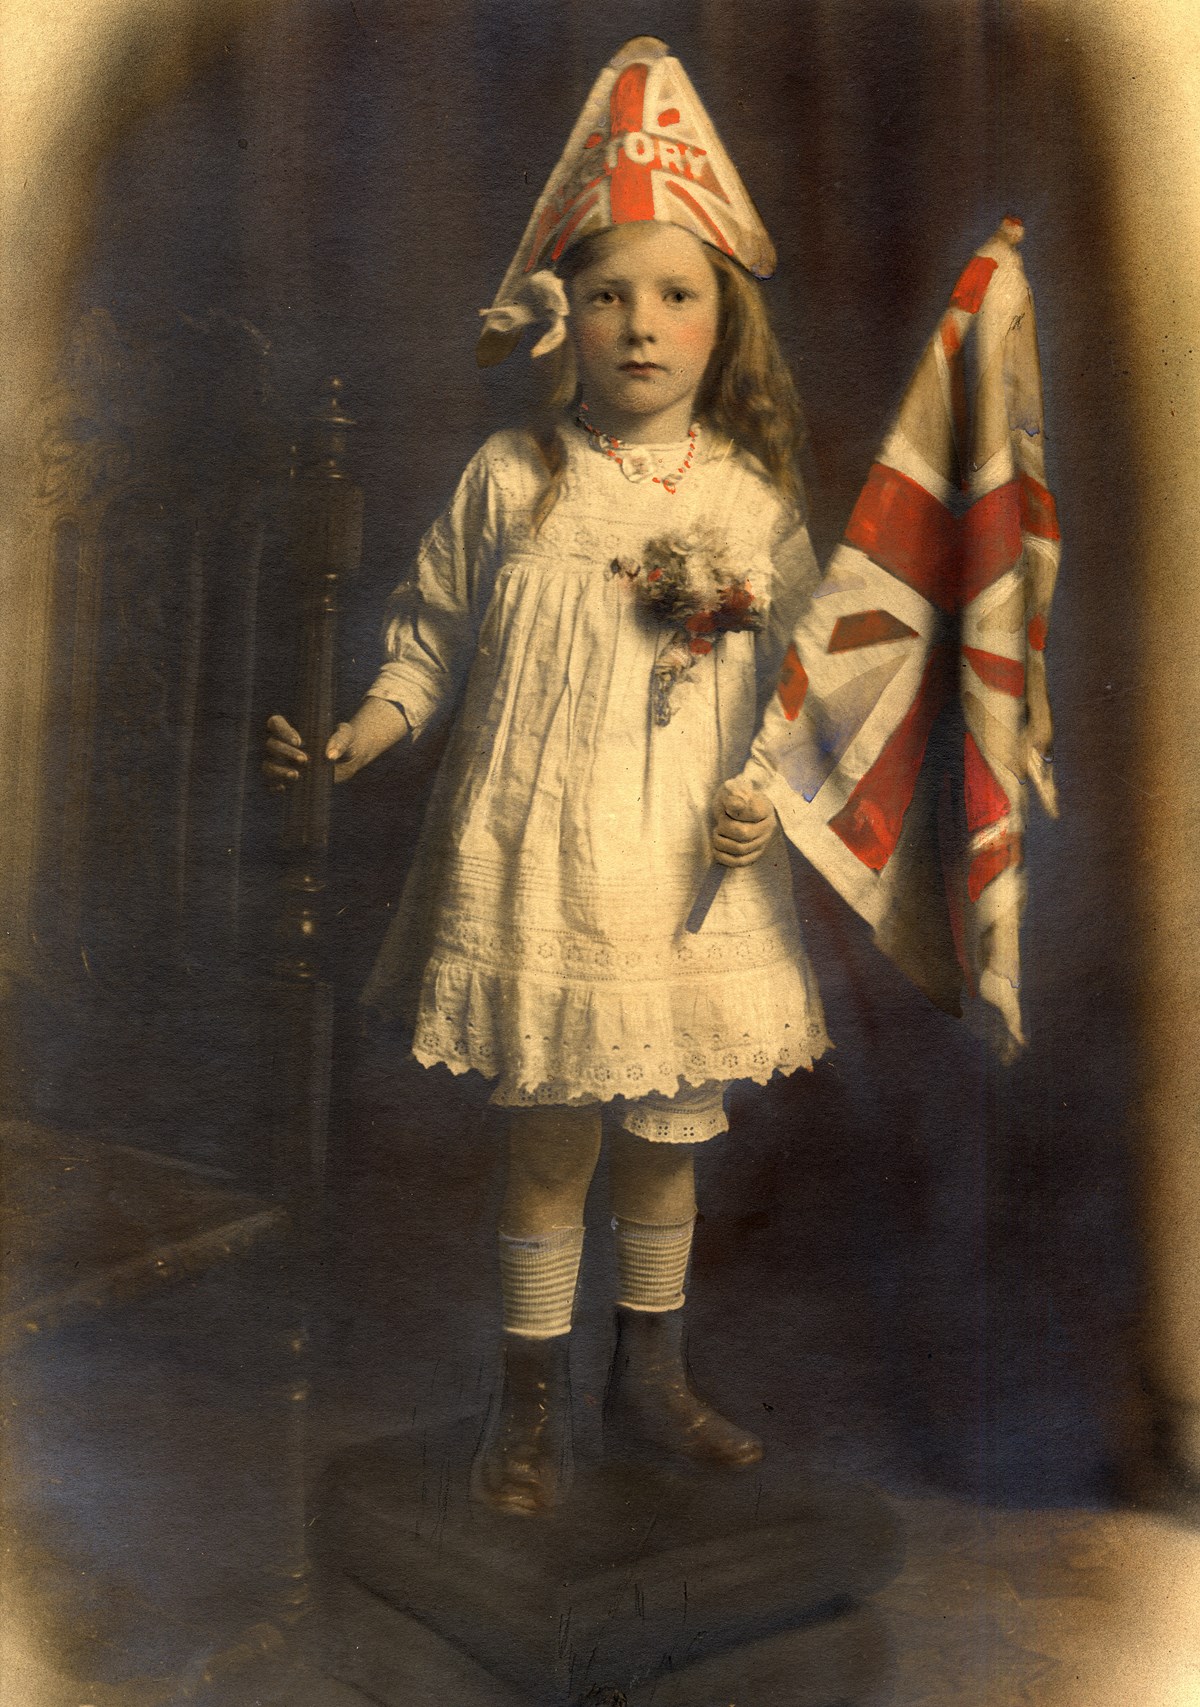 WW1 exhibition 2018 : Islington-born Evelyn Hilda Hutchings, aged five years, dressed as ‘Victory’, 1918/19